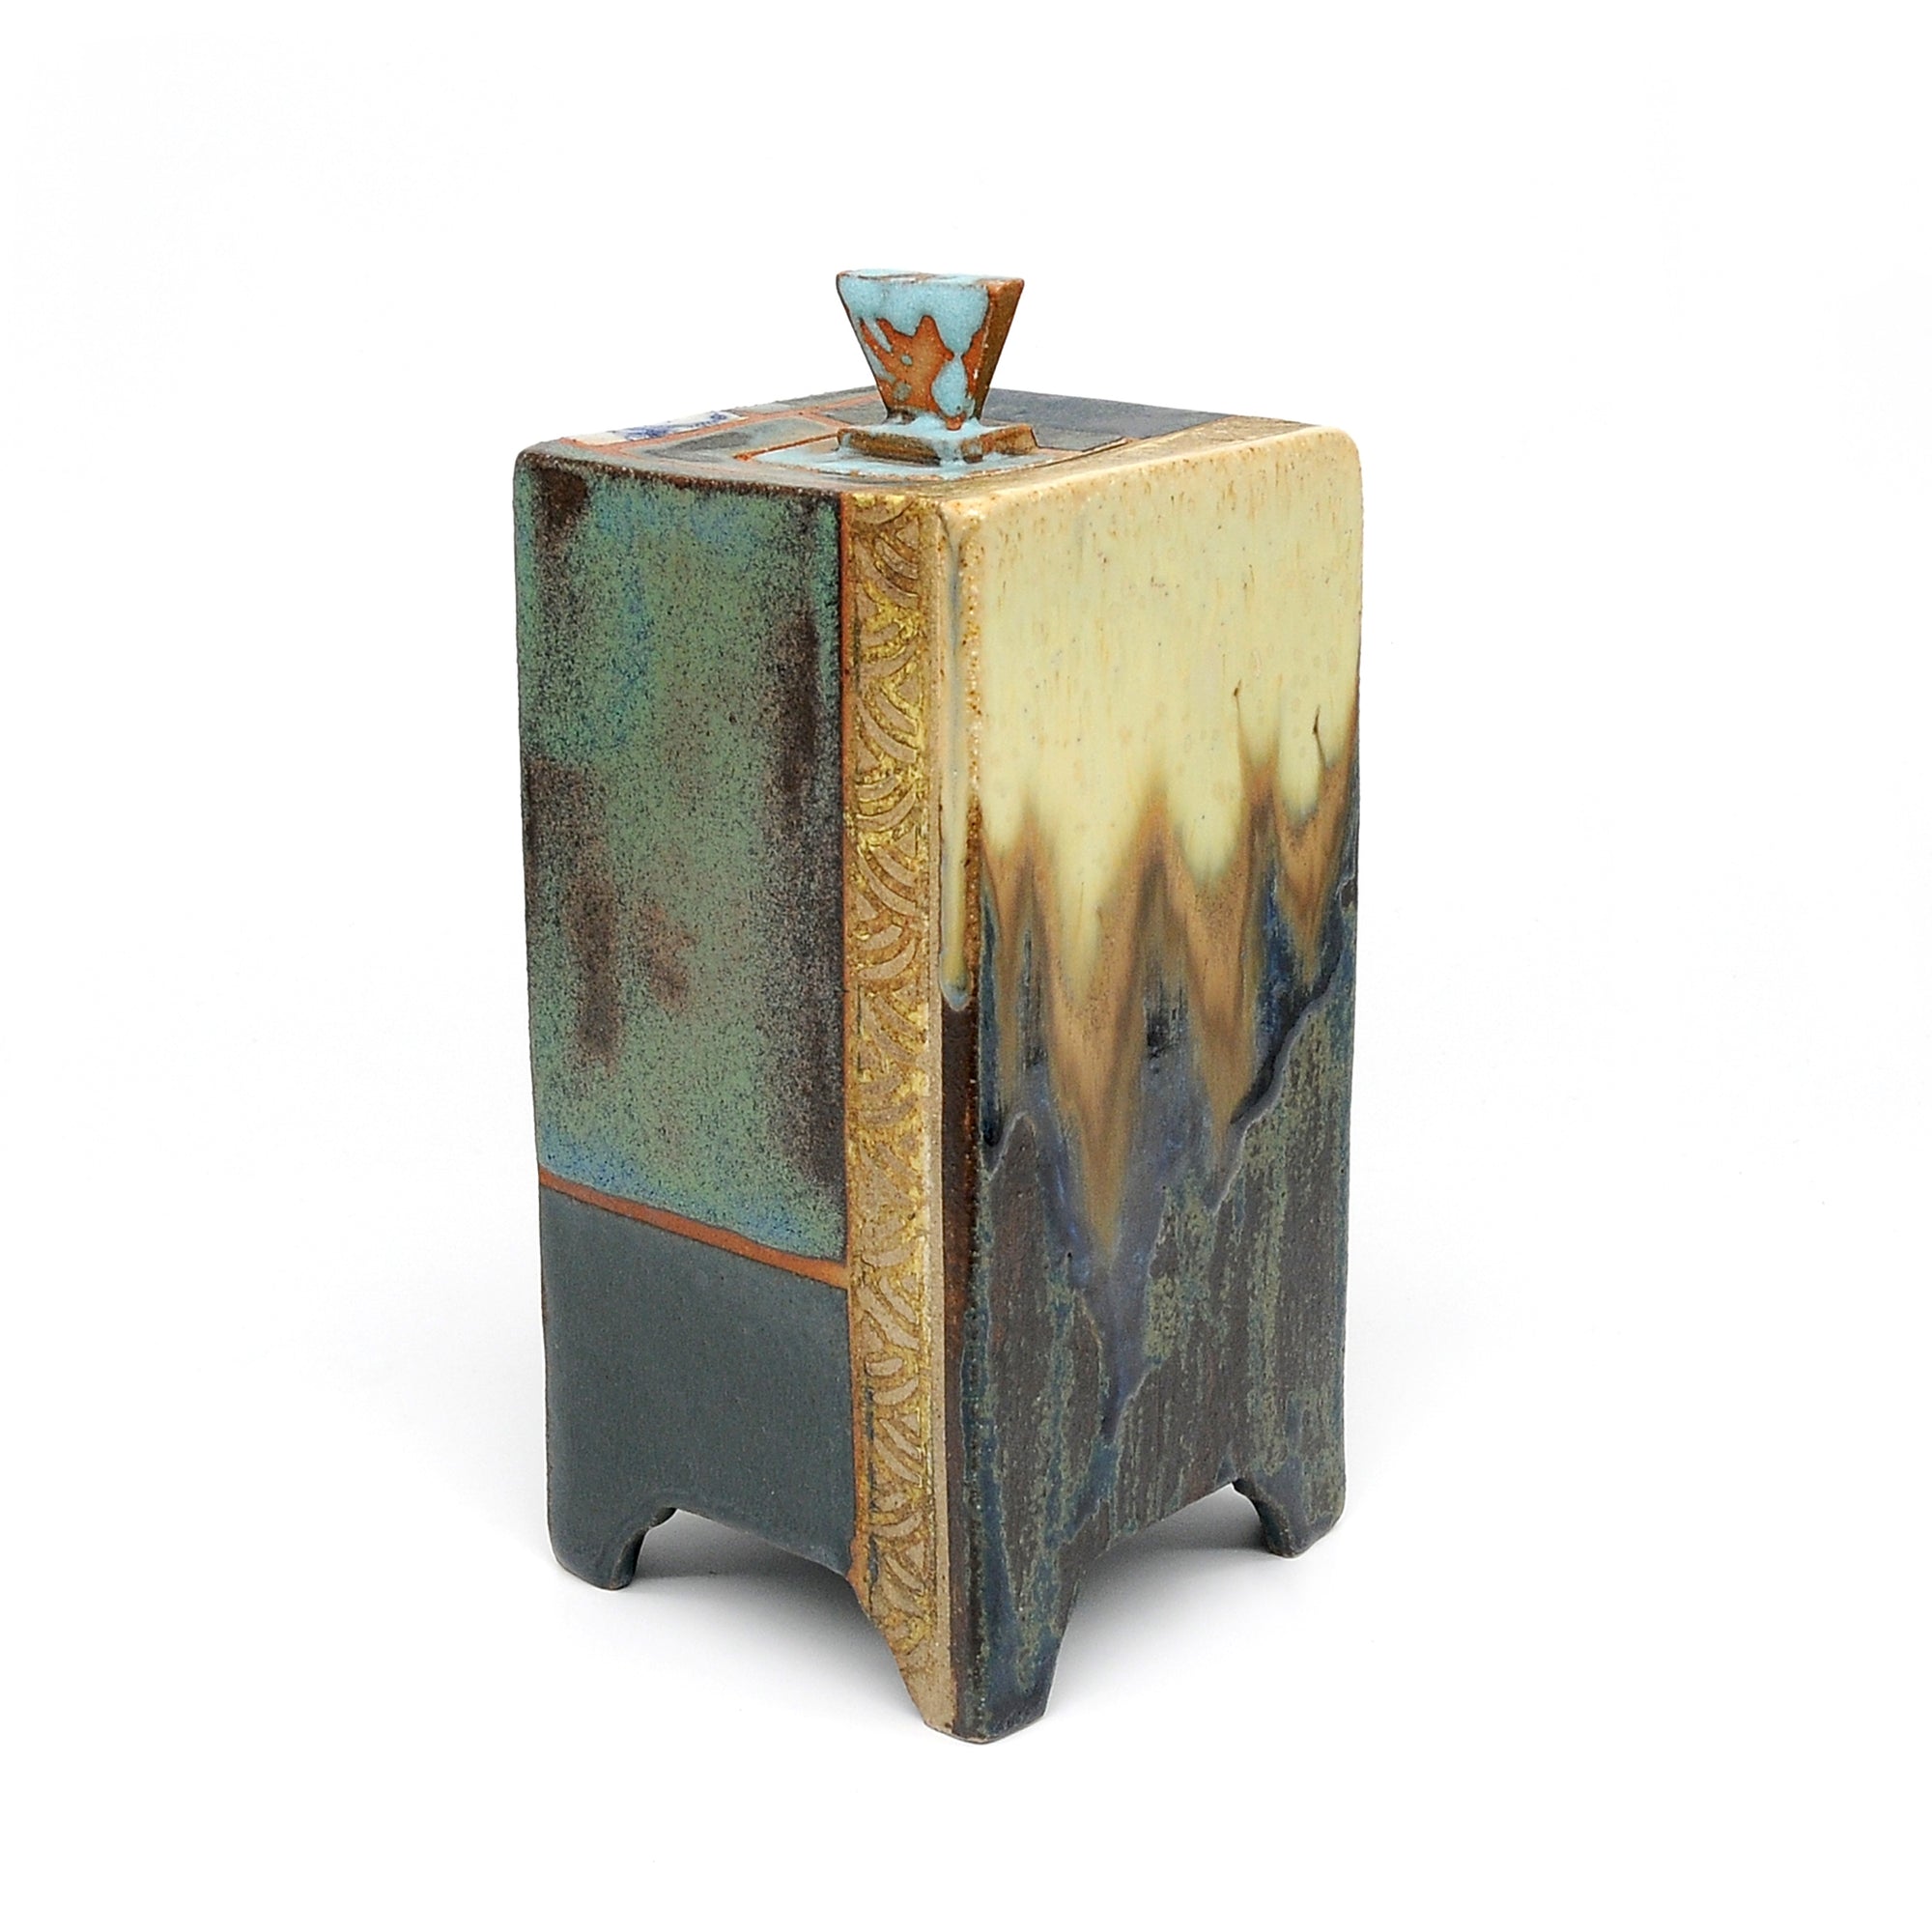 MK25 Box by Miae Kim ceramics, available at Padstow Gallery, Cornwall